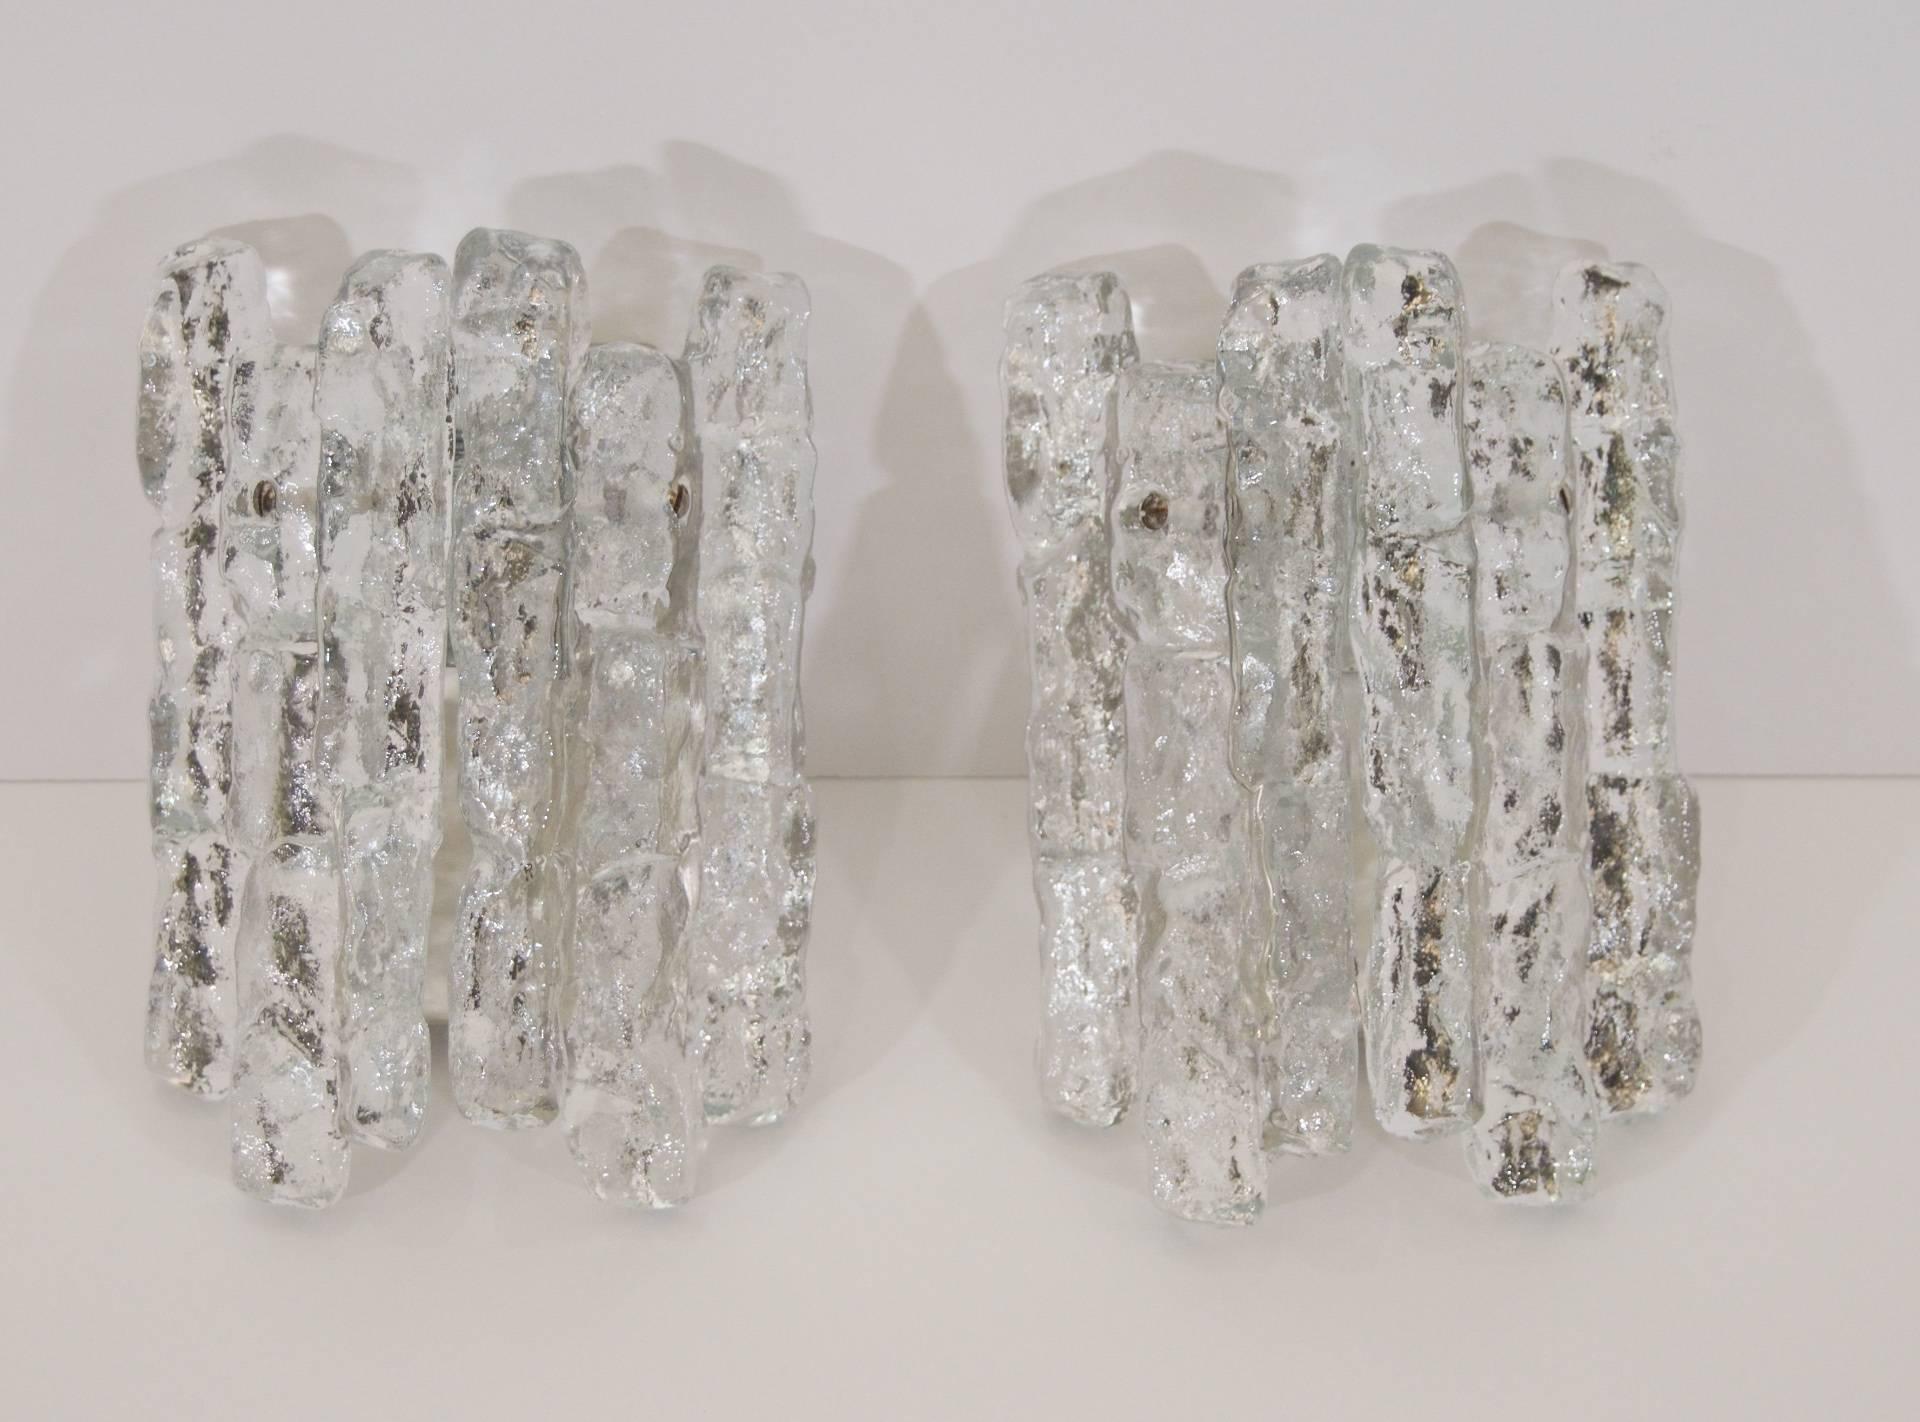 Excellent Kalmar ice glass wall sconces, each having two heavy pieces of ice glass. Petite size will work wonderfully in many spaces, ideal for narrow spaces. 

One E-14 base bulb per sconce up to 40 watts, new wiring.

Please note, price listed is